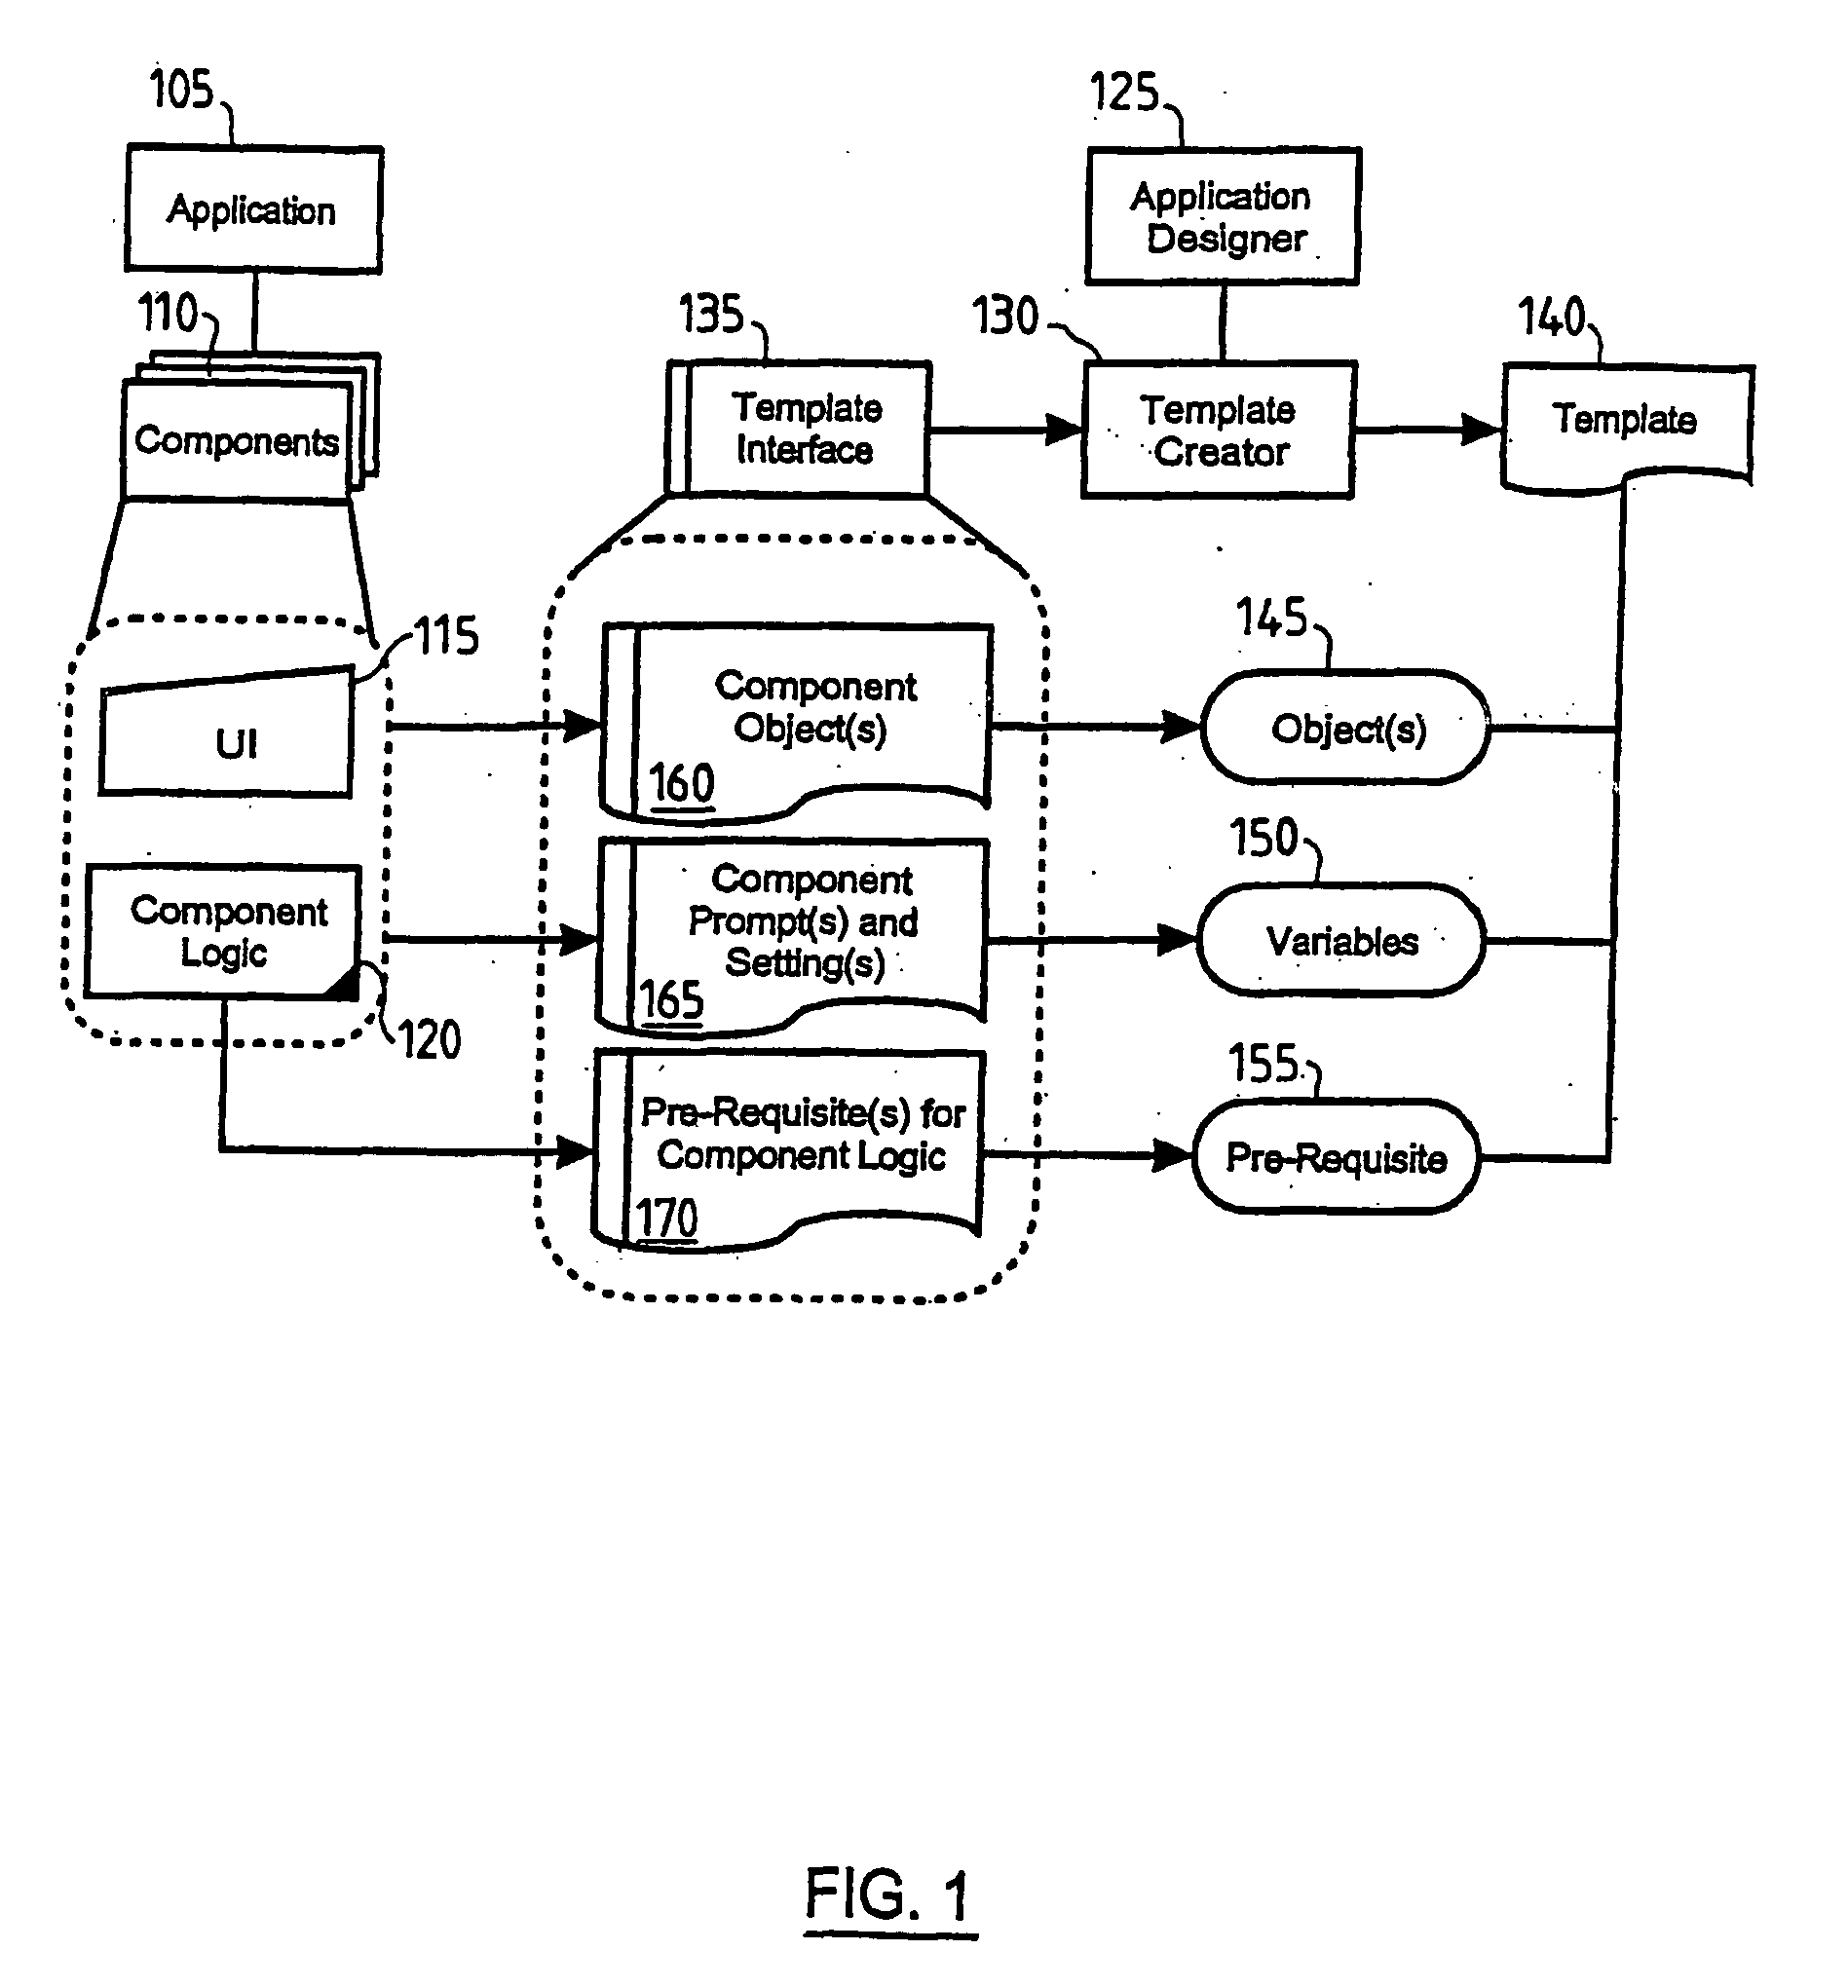 Method and system for updating application design